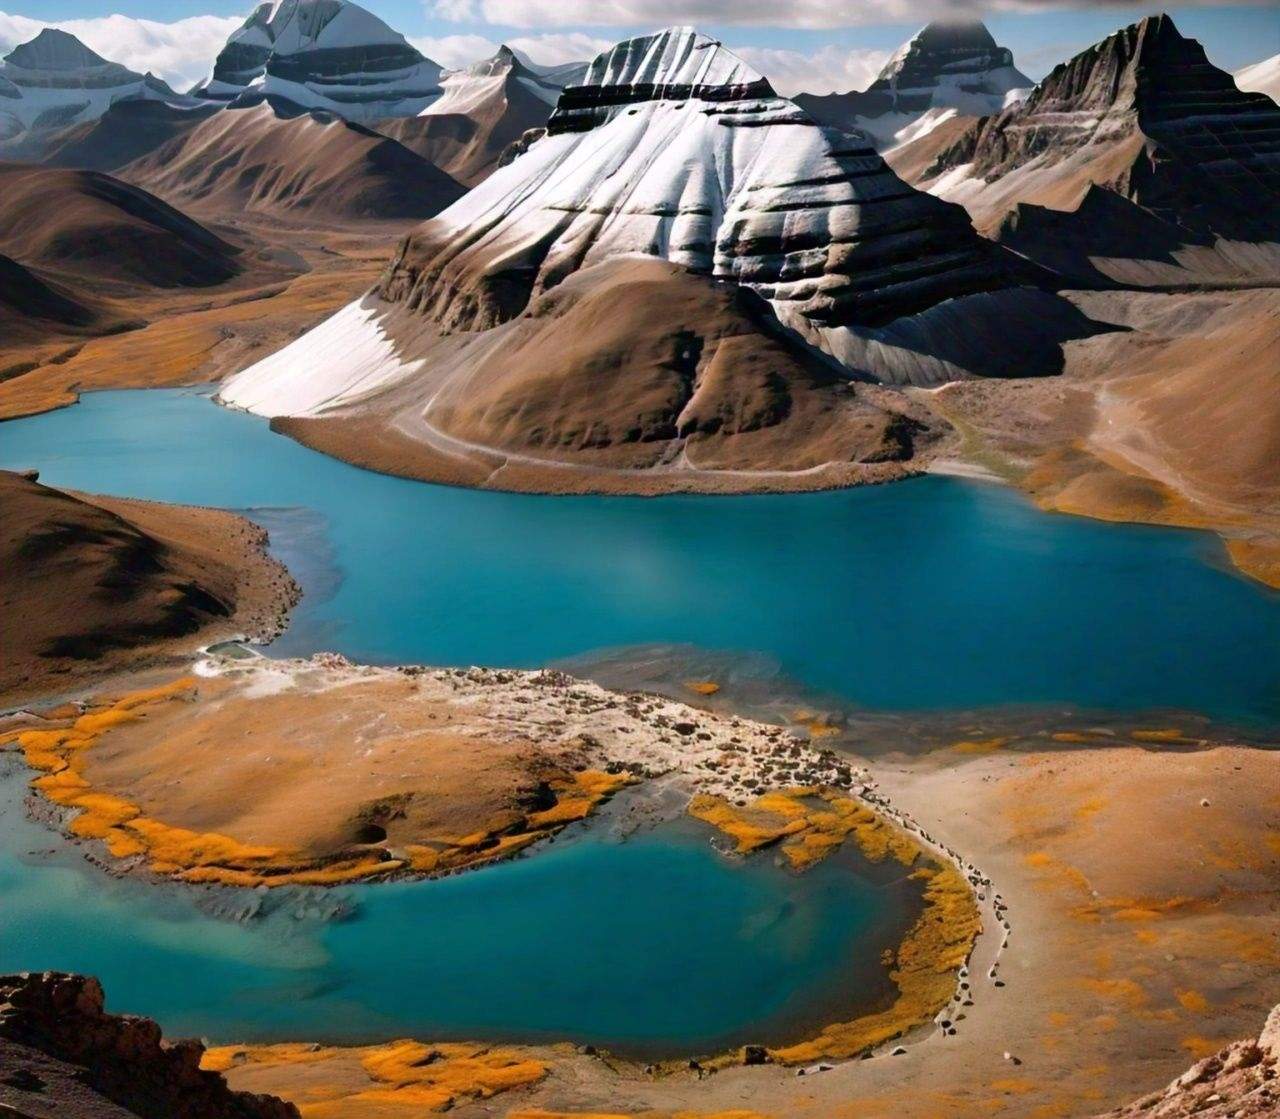 Majesty of the Himalayas: Mount Kailash in All Its Glory